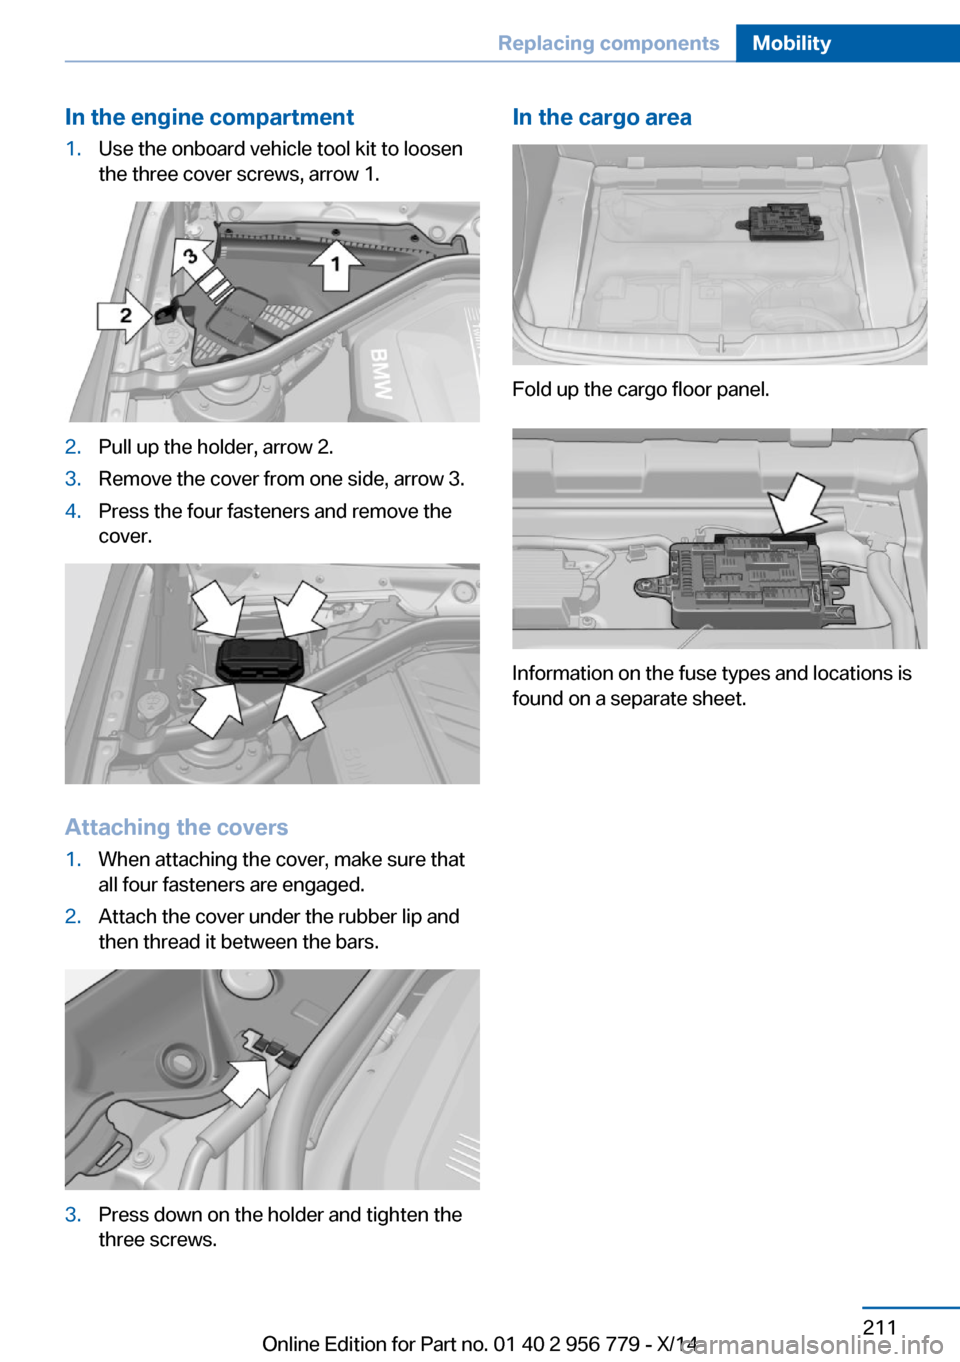 BMW 4 SERIES COUPE 2014 F32 Owners Manual In the engine compartment1.Use the onboard vehicle tool kit to loosen
the three cover screws, arrow 1.2.Pull up the holder, arrow 2.3.Remove the cover from one side, arrow 3.4.Press the four fasteners